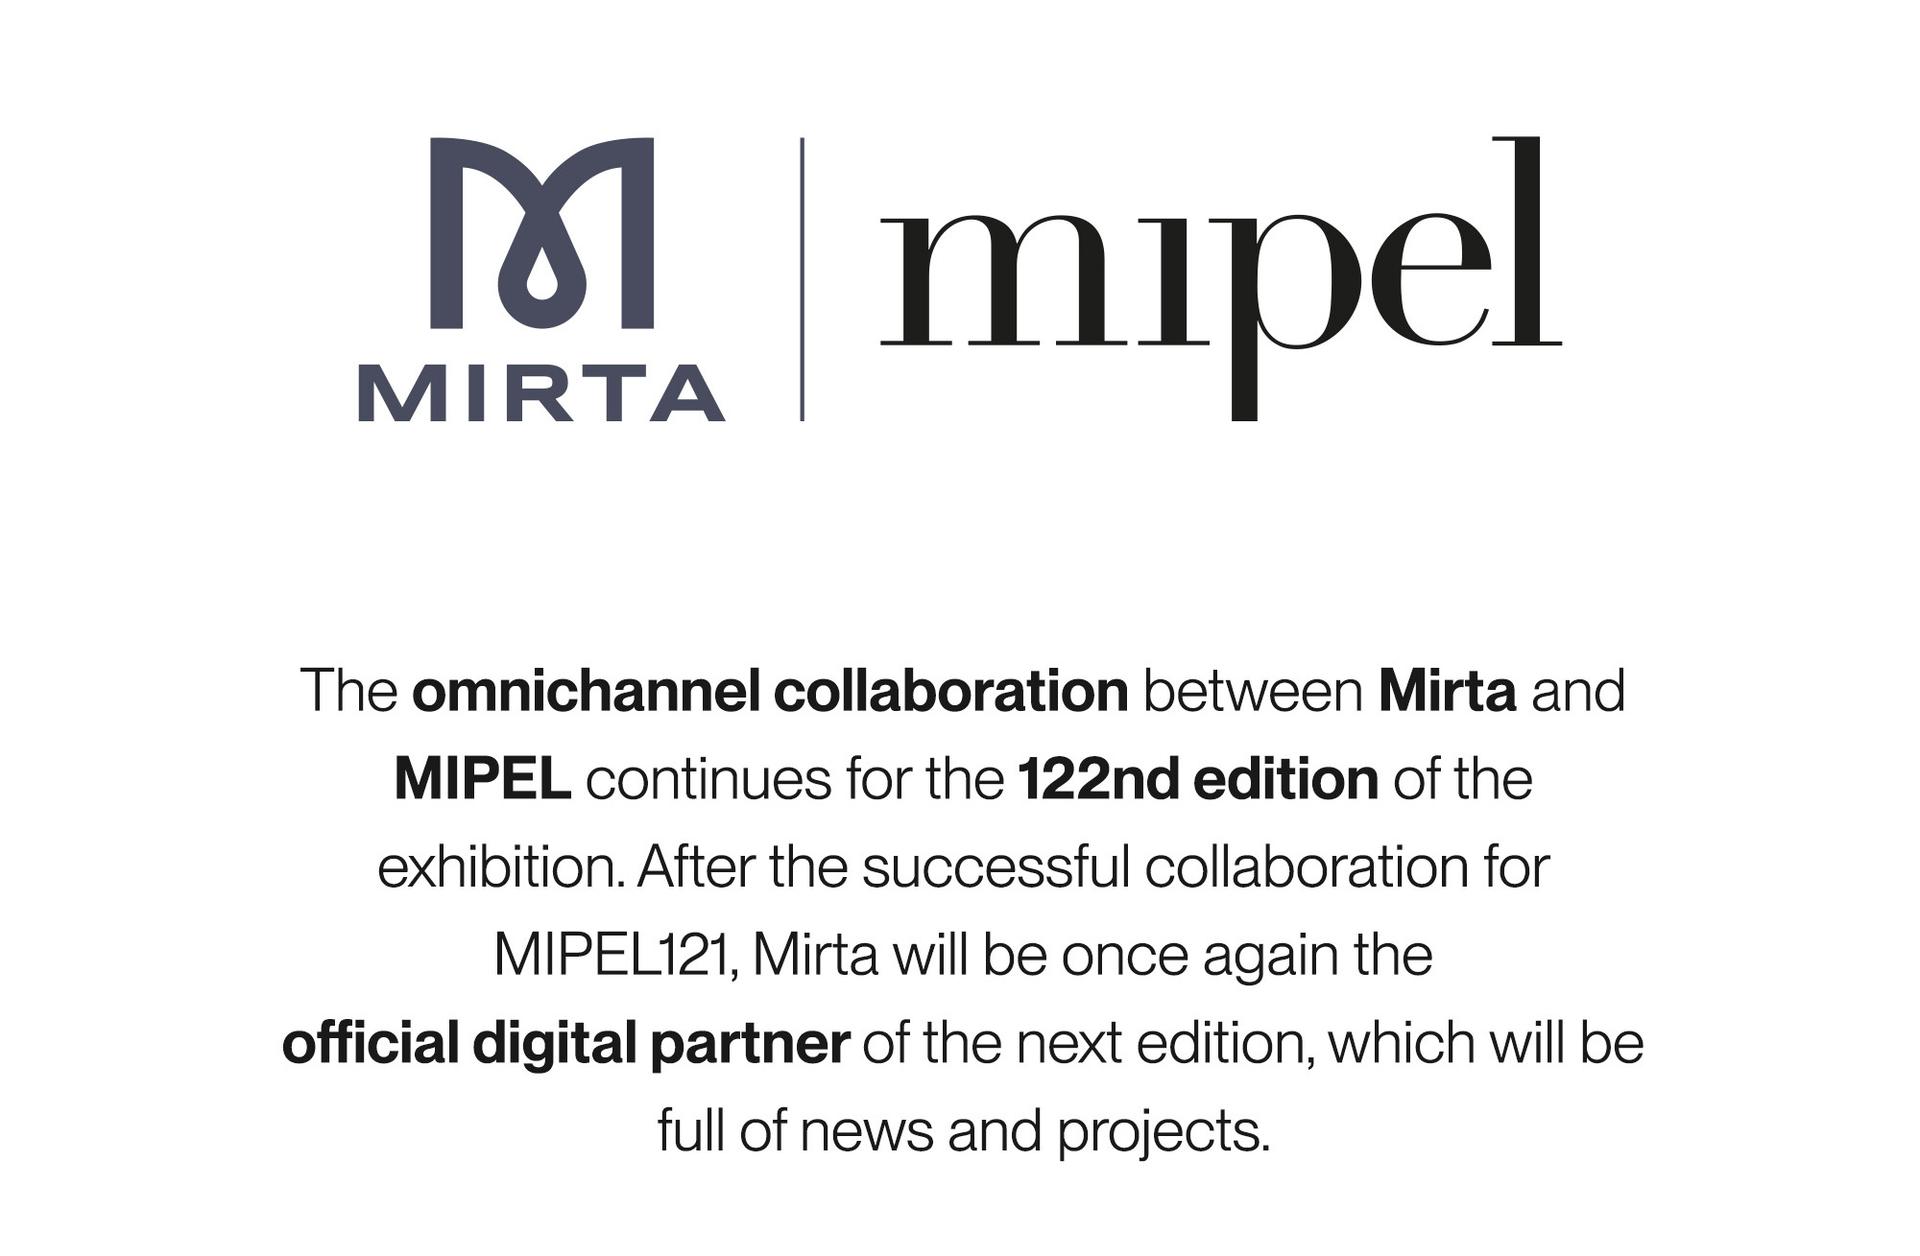 The omnichanne collaboration between Mirta and MIPEL continues for the 112nd edition